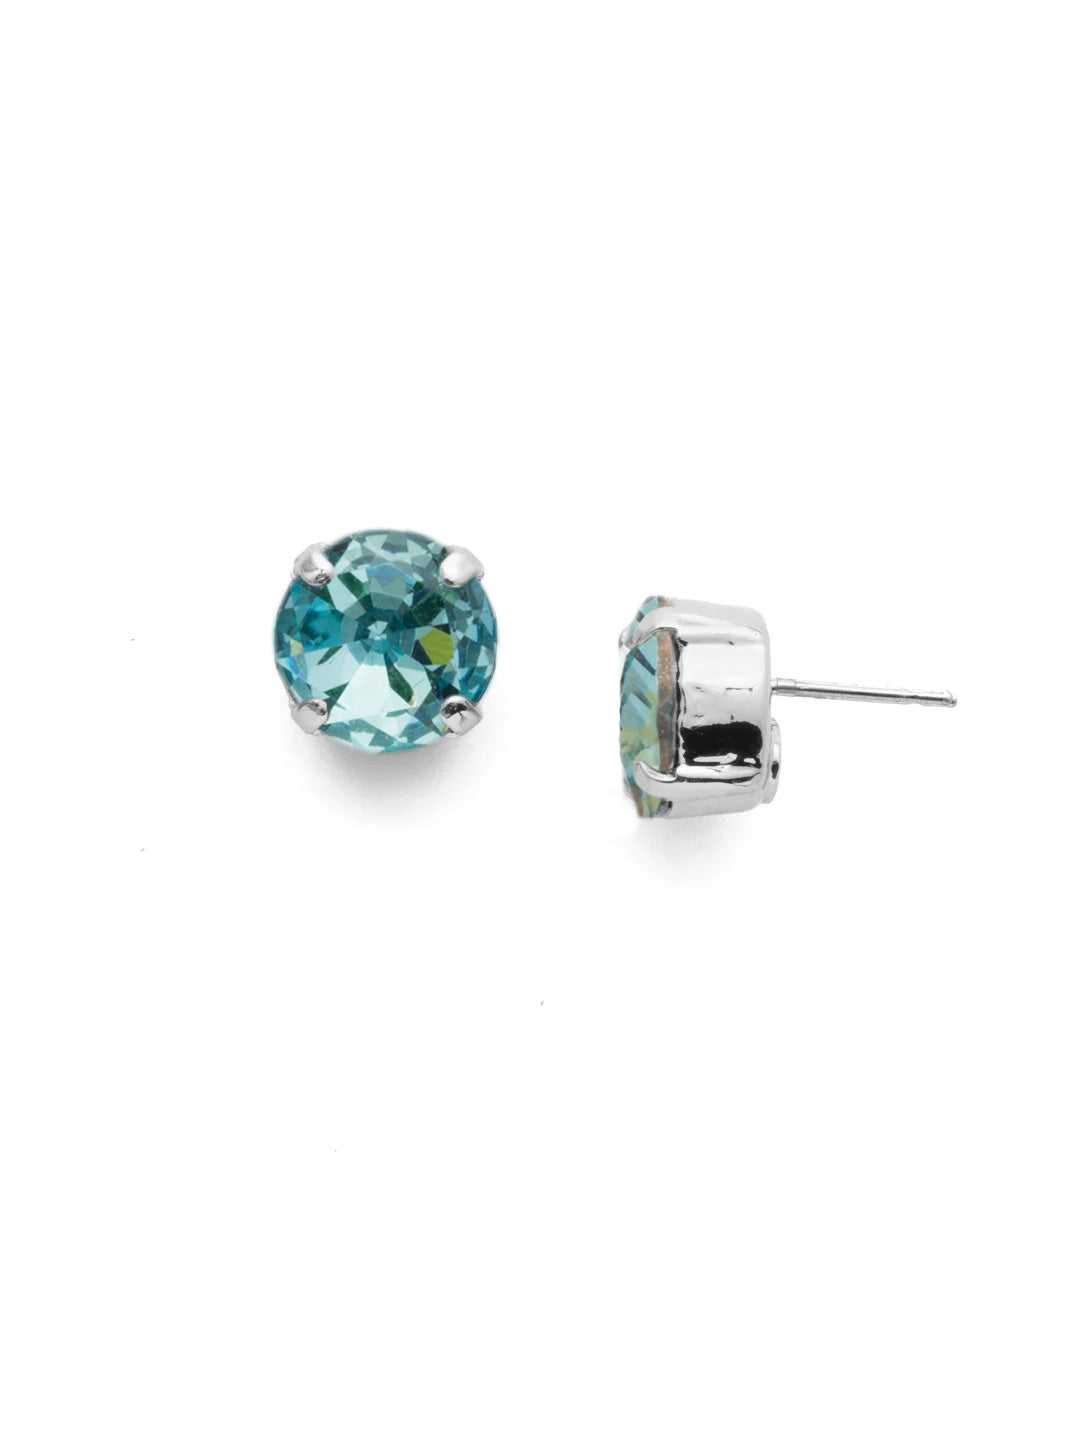 London Stud Earrings - ECM14PDAQU - <p>Everyone needs a great pair of studs. Add some classic sparkle to any occasion with these stud earrings. Need help picking a stud? <a href="https://www.sorrelli.com/blogs/sisterhood/round-stud-earrings-101-a-rundown-of-sizes-styles-and-sparkle">Check out our size guide!</a> From Sorrelli's Aquamarine collection in our Palladium finish.</p>